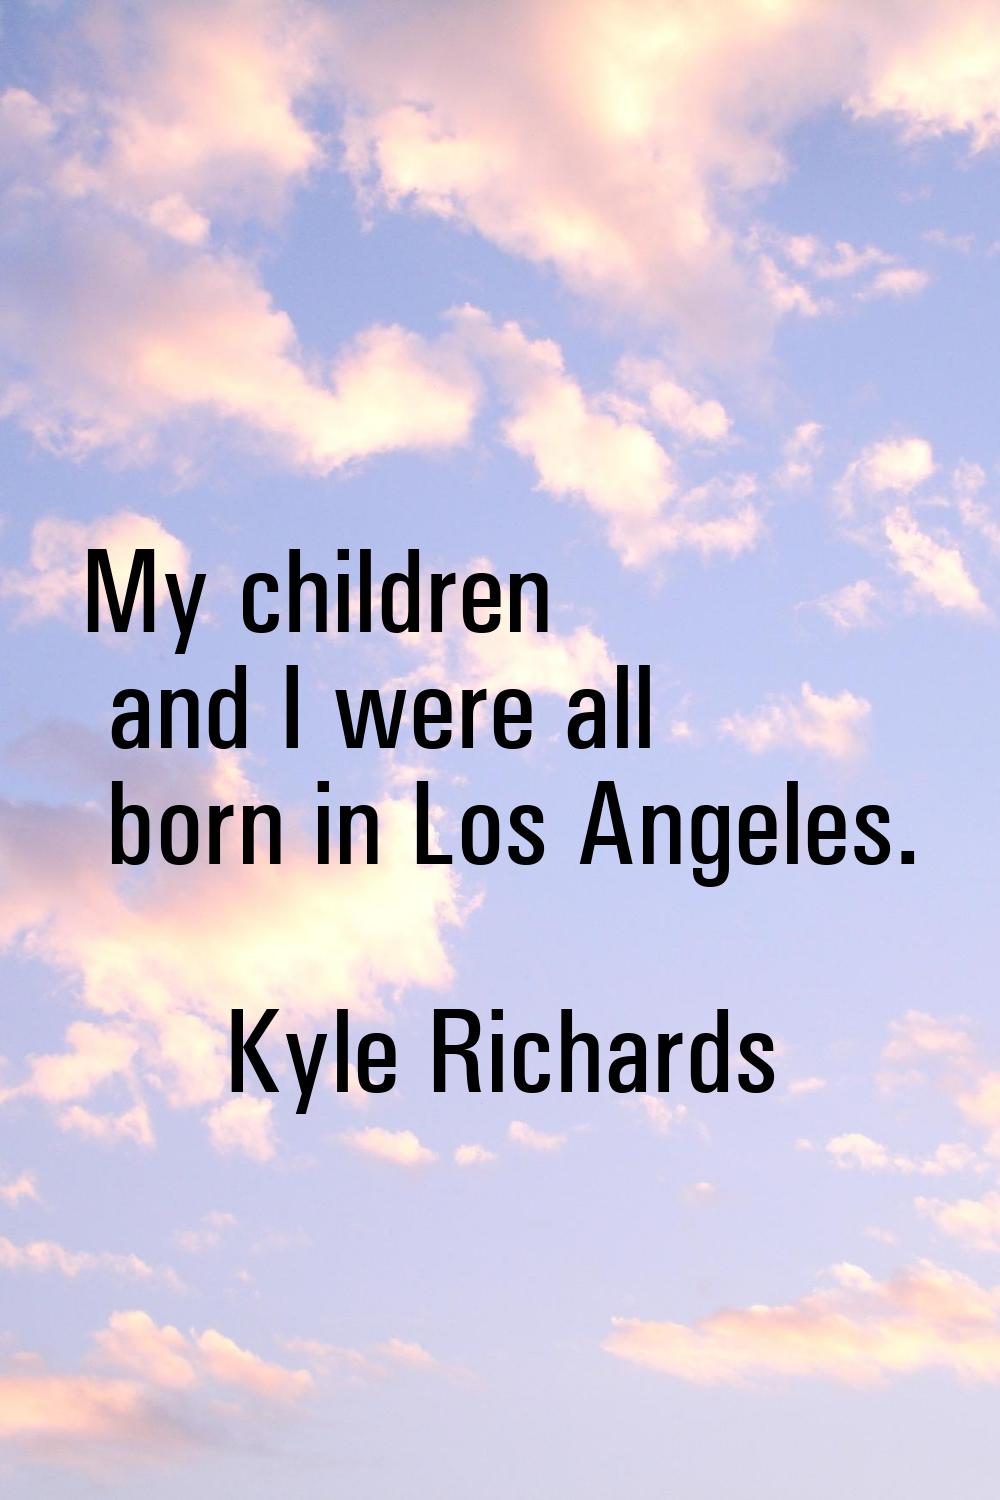 My children and I were all born in Los Angeles.